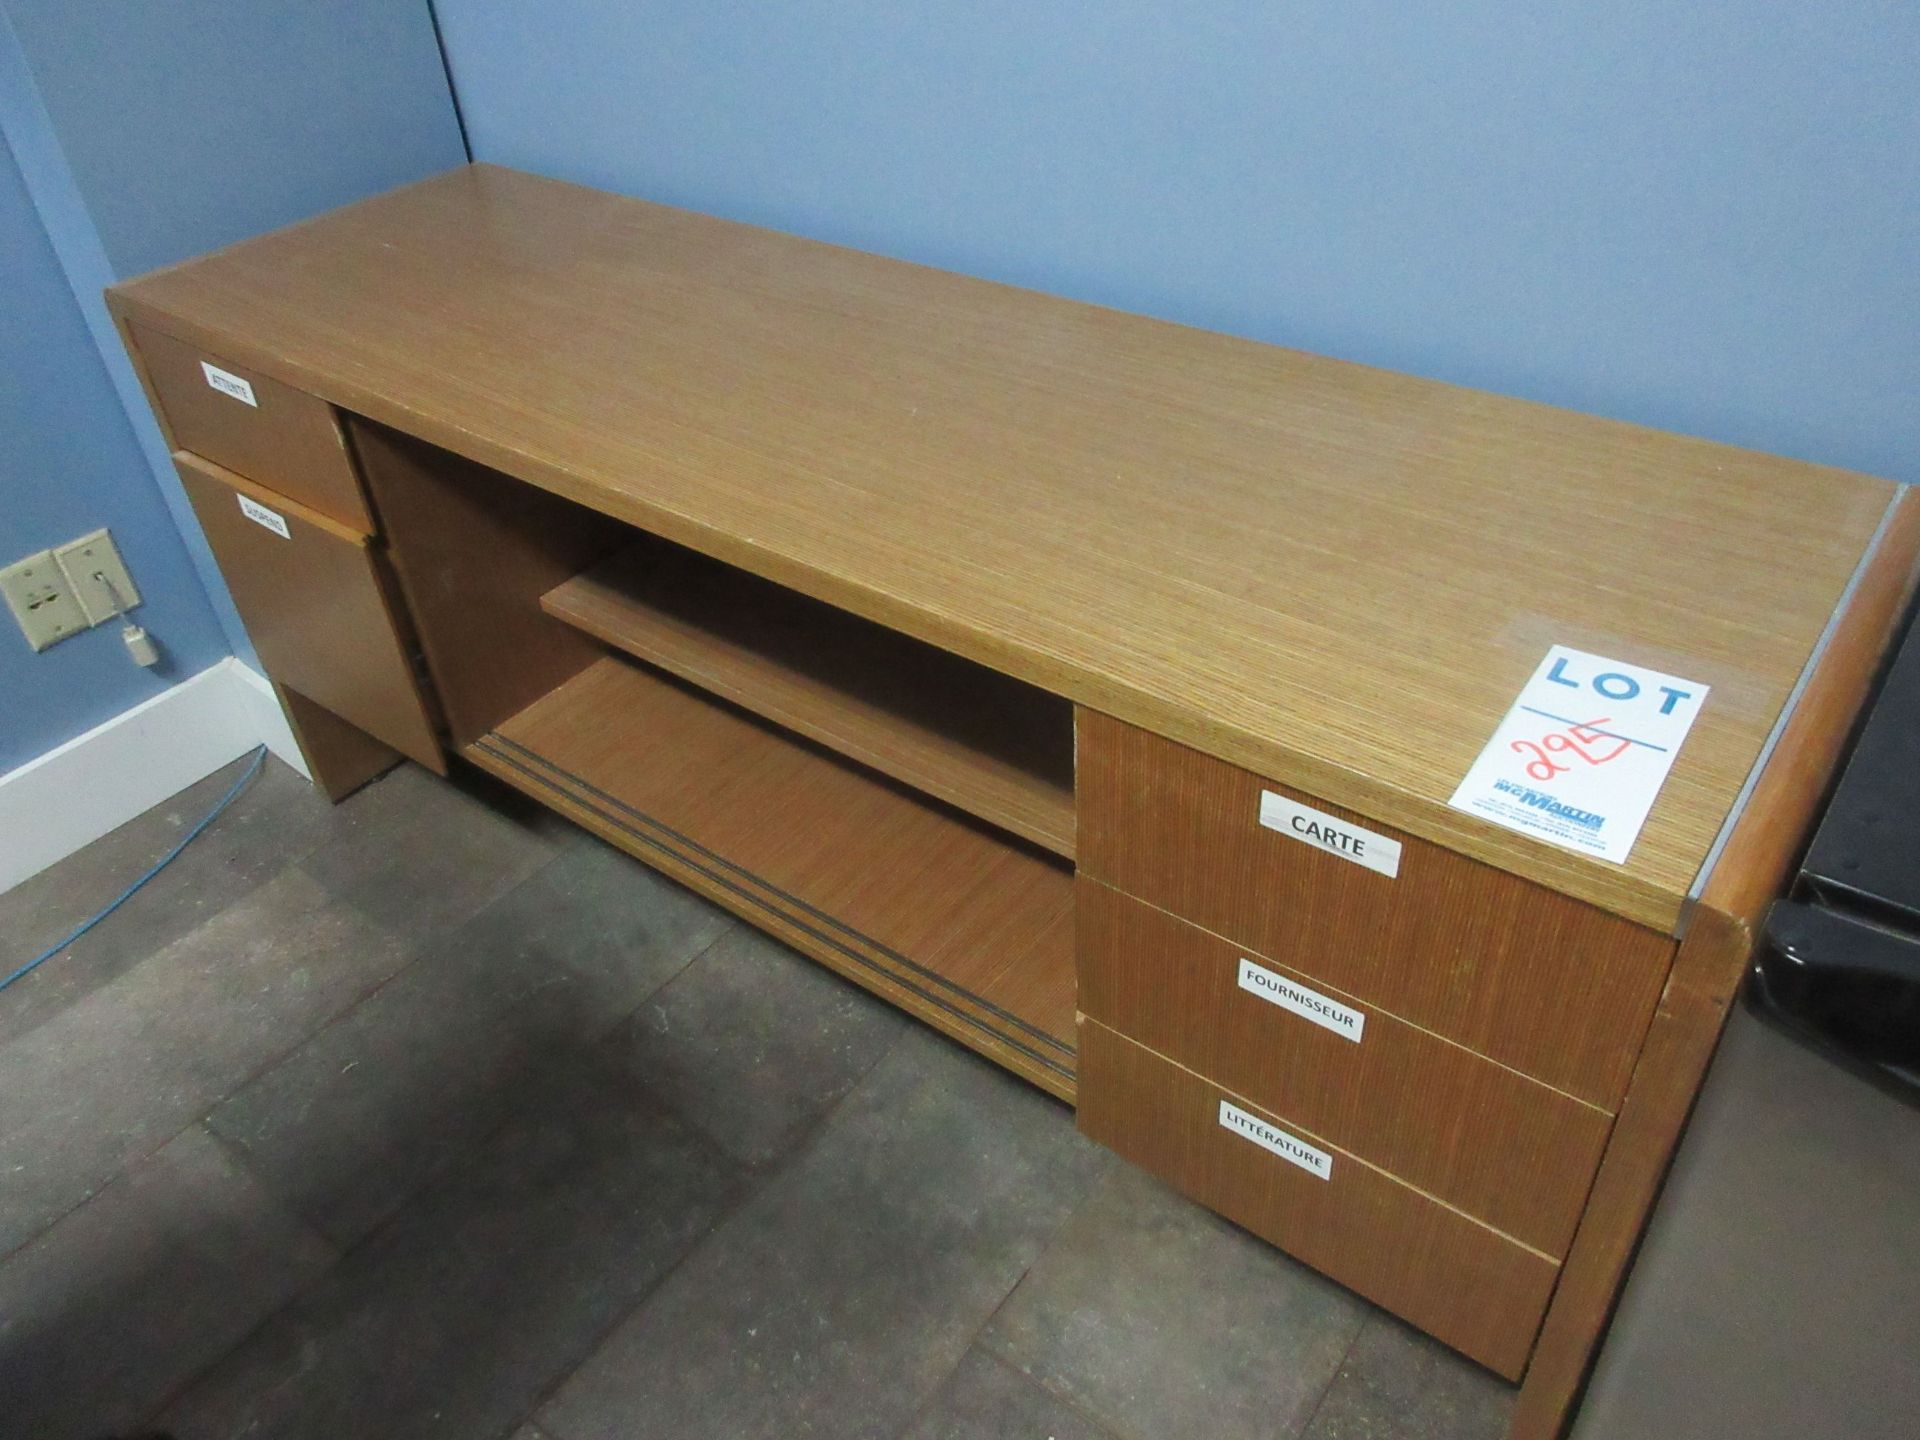 LOT including desk, credenza,chair, etc. - Image 2 of 2